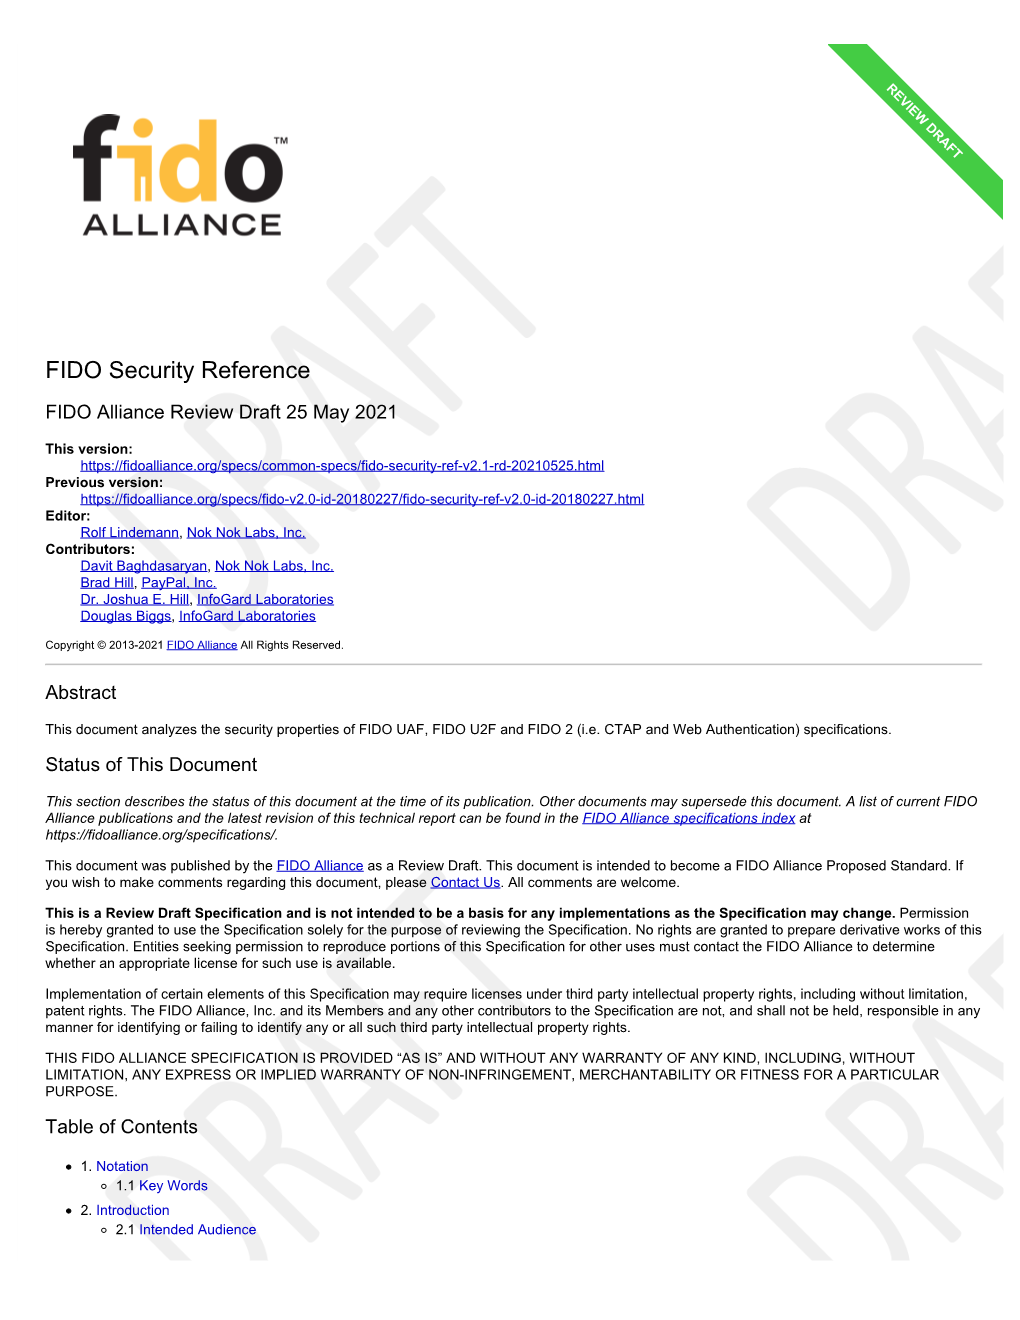 FIDO Security Reference